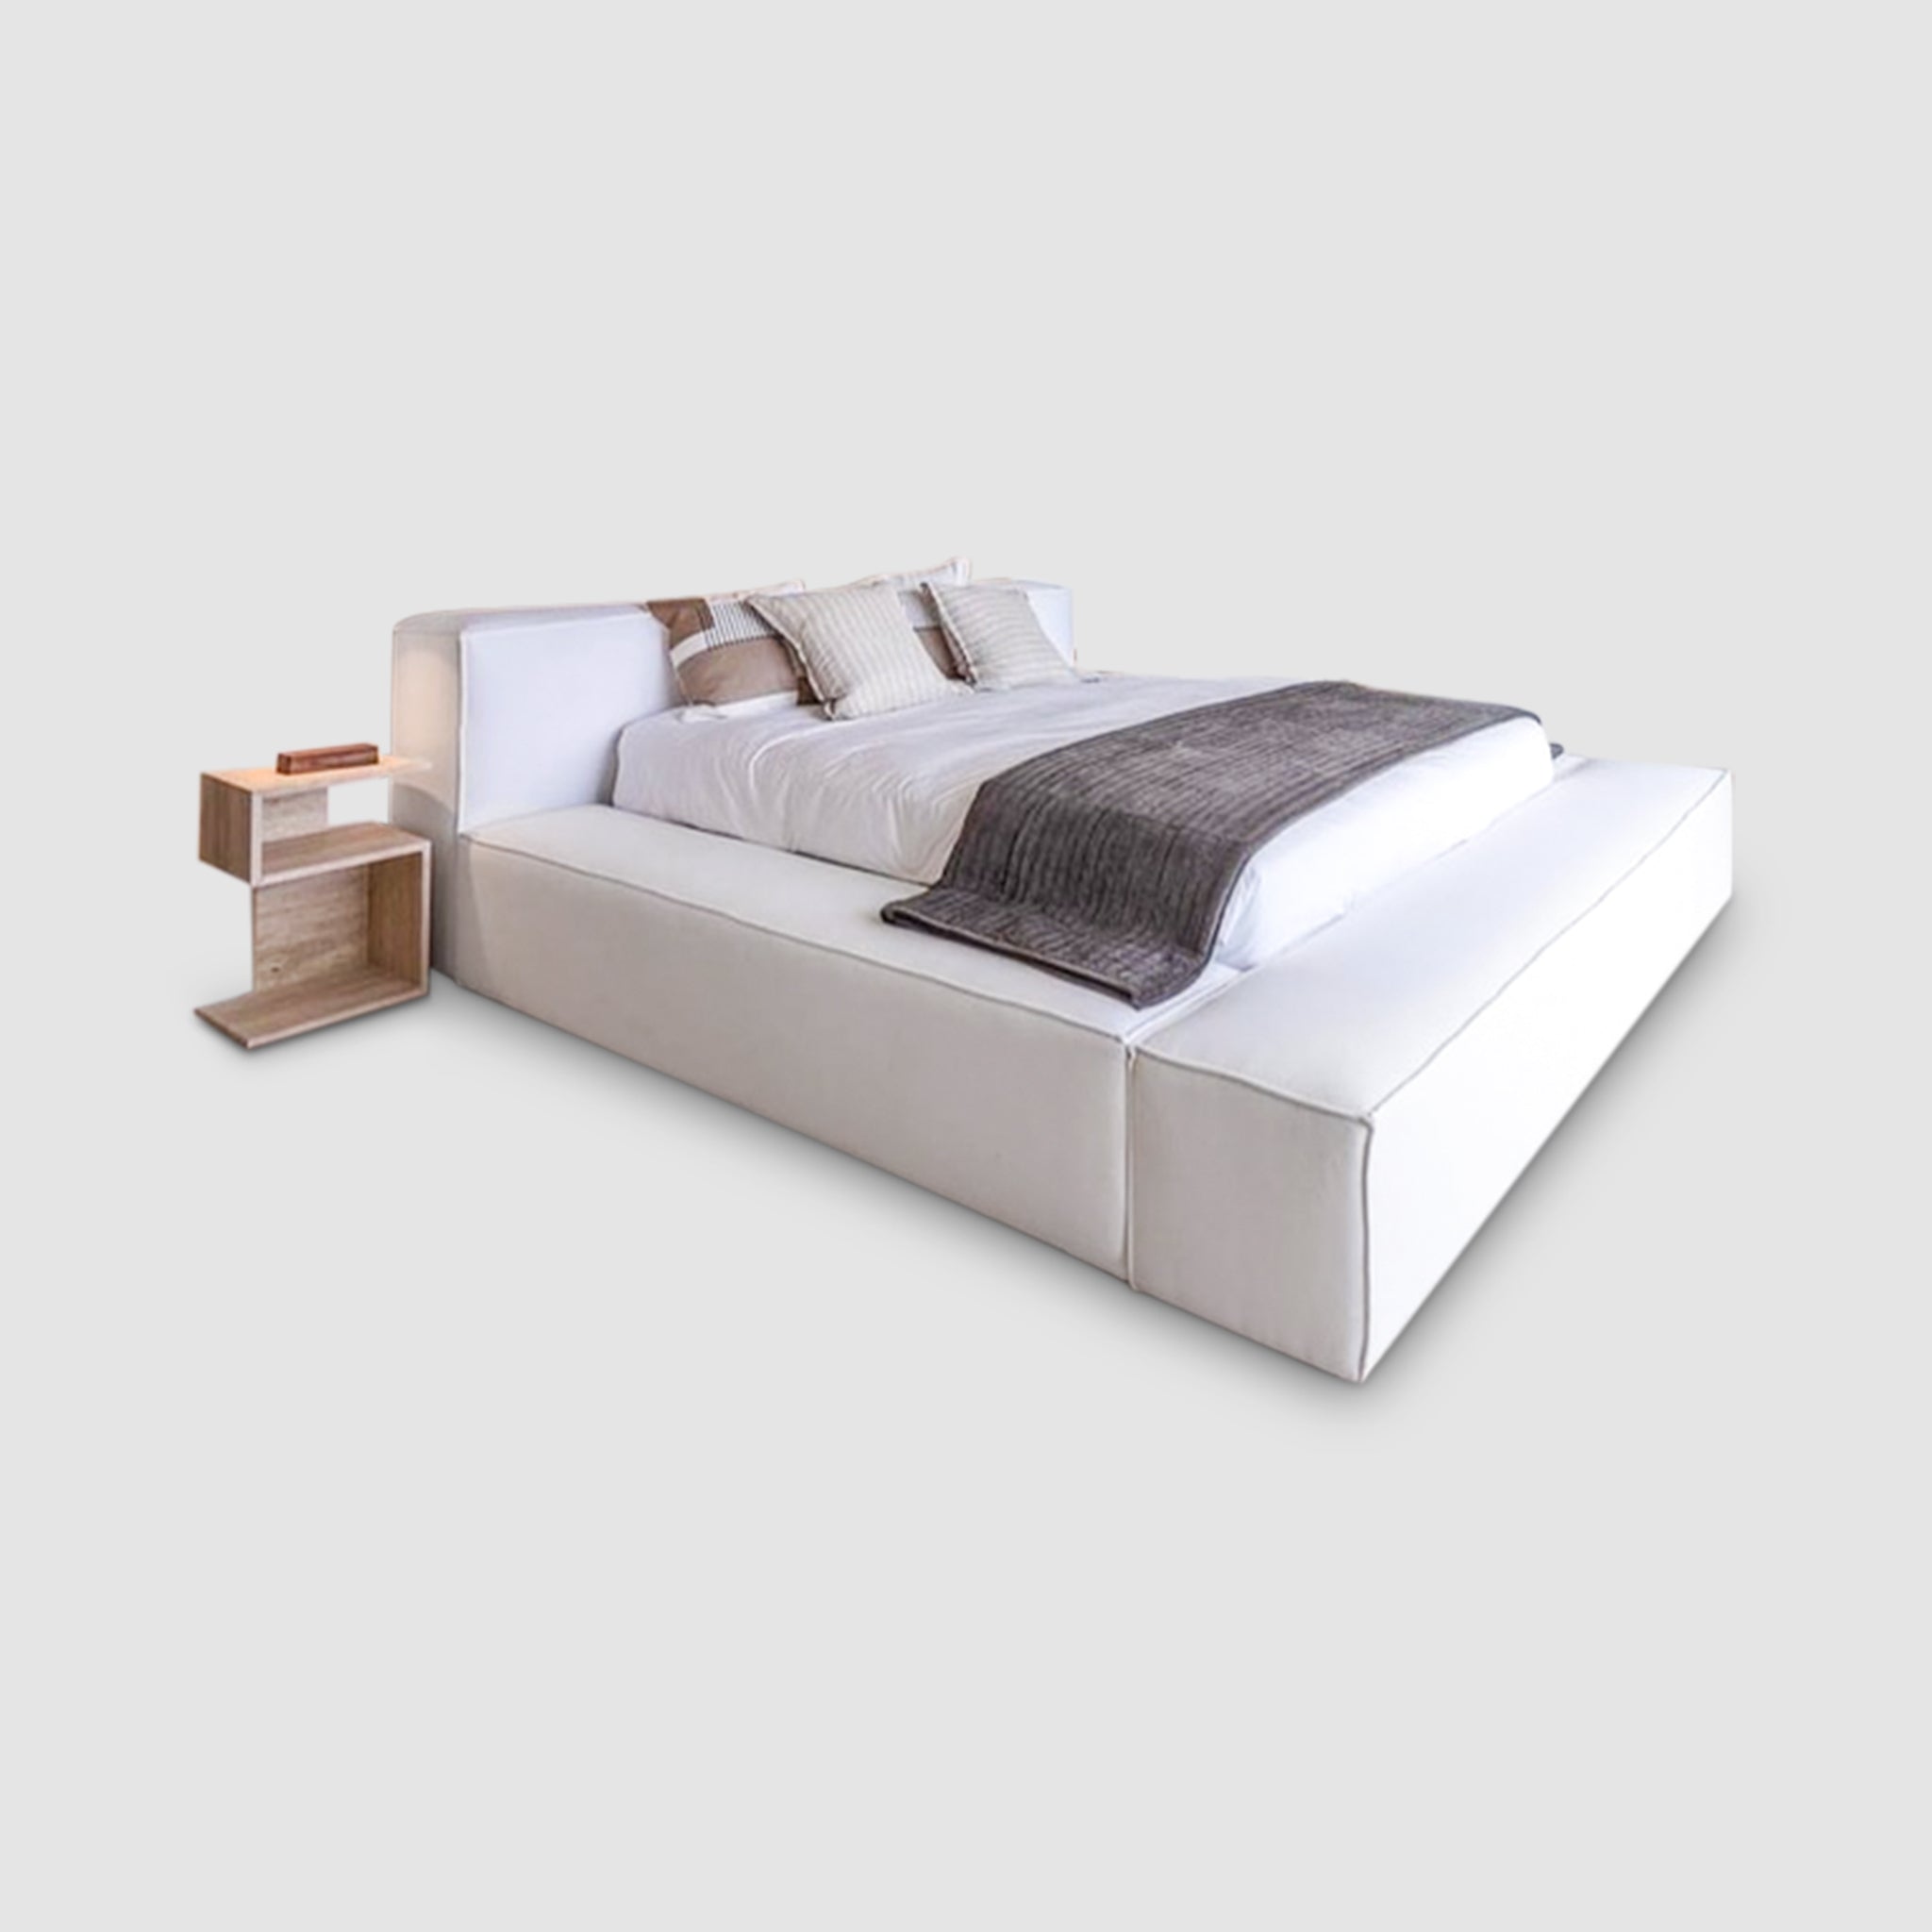 Luxurious white platform bed with a modern nightstand. Perfect for a minimalist bedroom.